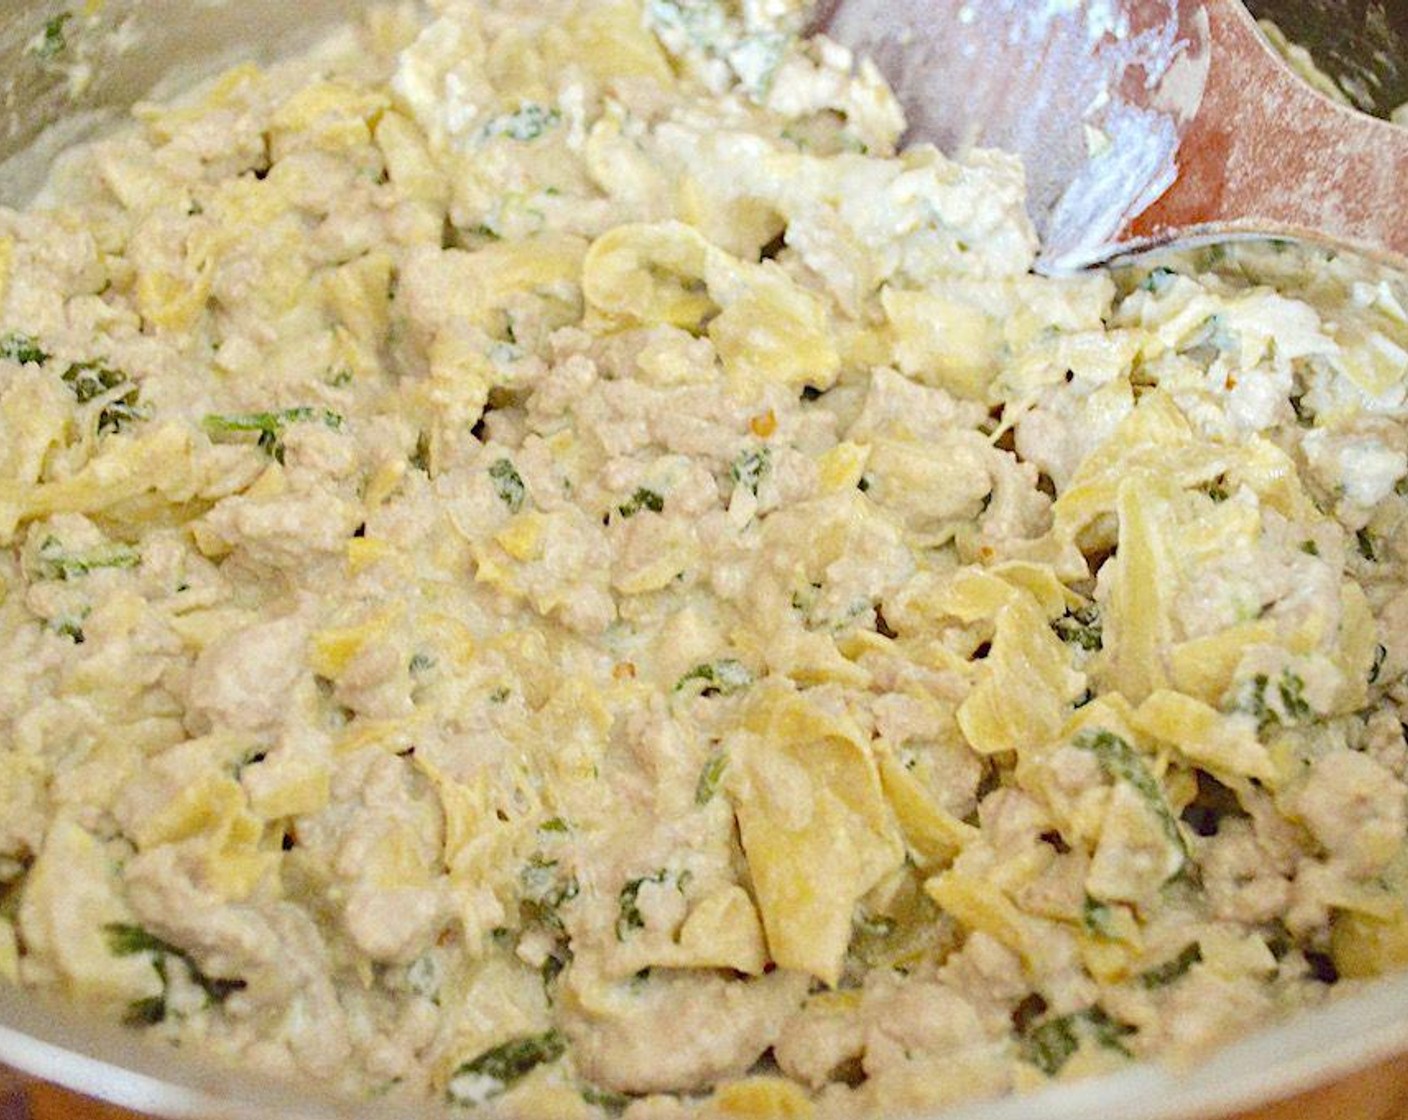 step 5 Once it is cooked, pour in the White Wine (1 Tbsp) and Chicken Stock (1 Tbsp). Let the whole mixture simmer until the liquid is gone for about 8 minutes. Finally, take the pan off of the heat and stir in the Ricotta Cheese (3/4 cup). Let the mixture cool while you get ready to bake.